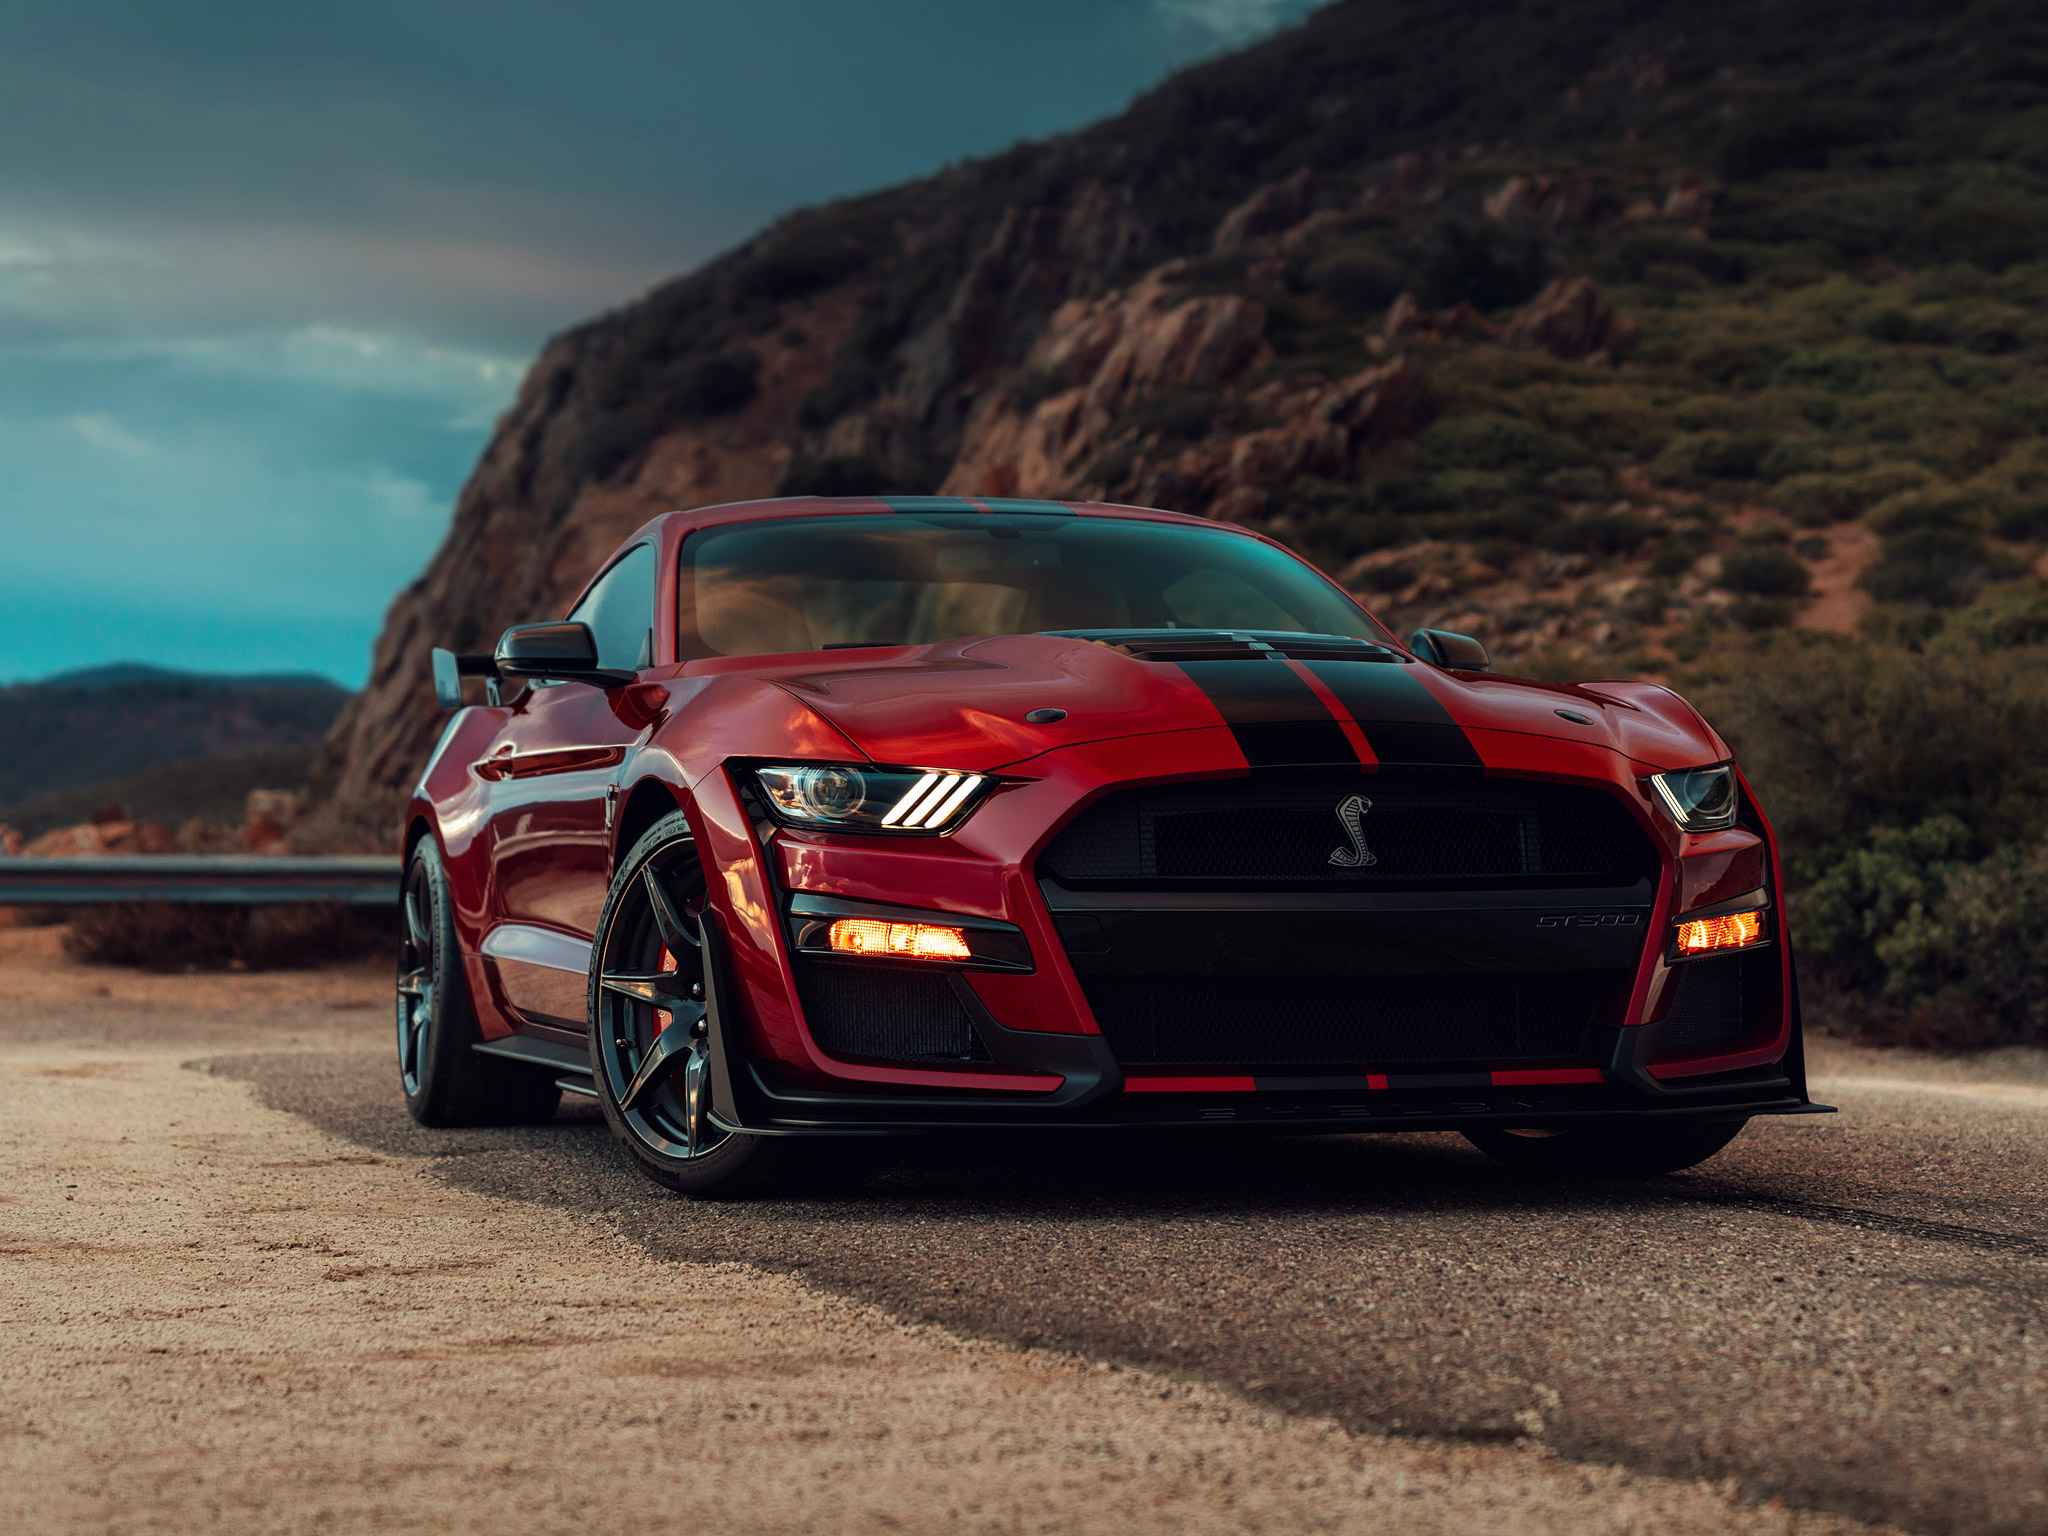  2020 Ford Mustang Shelby GT500 Wallpaper.